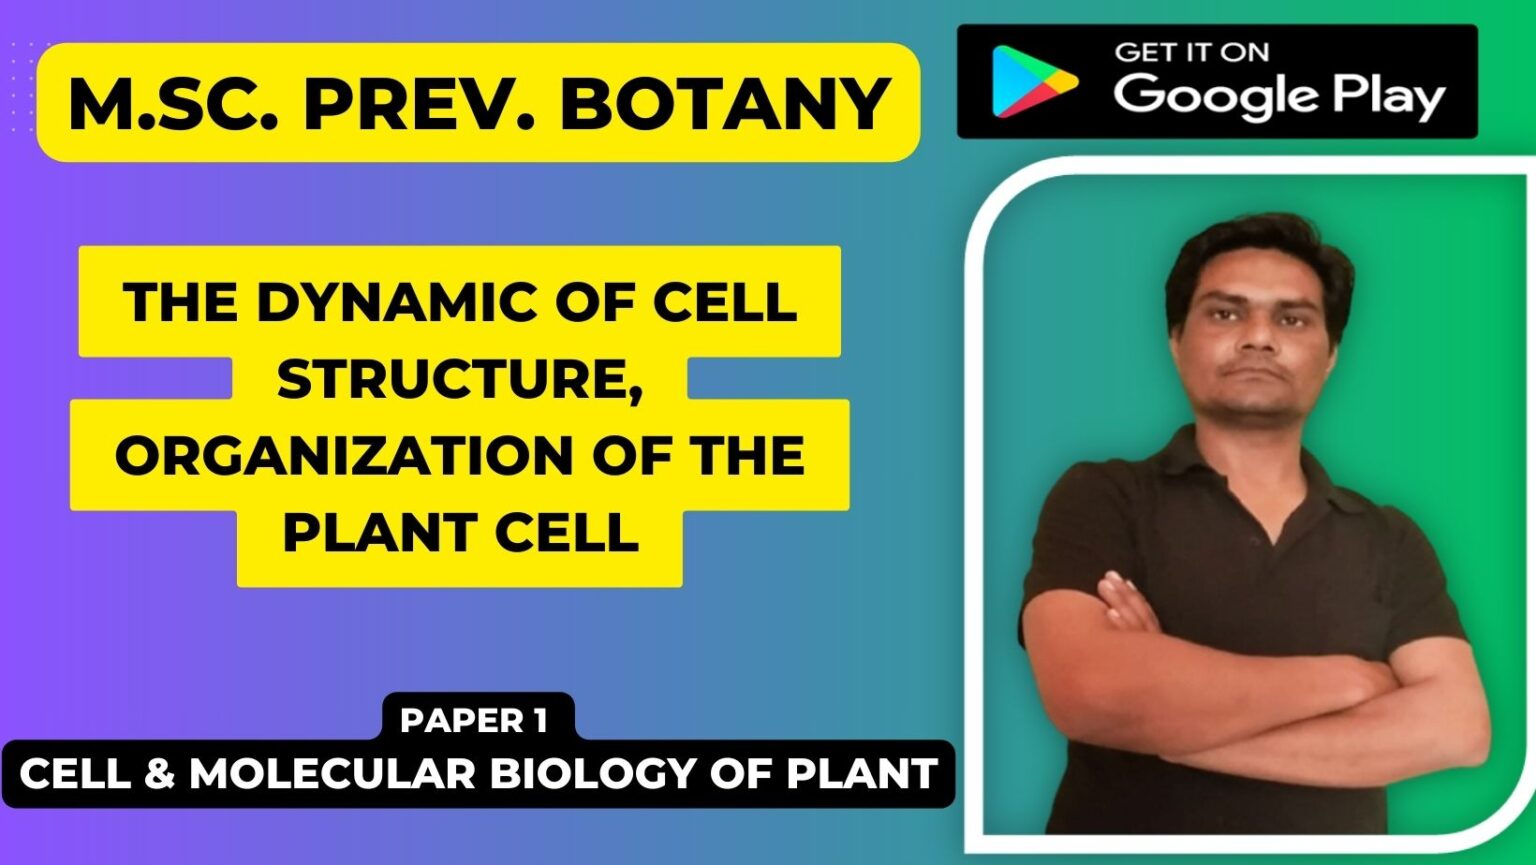 The dynamic of cell structure, organization of the plant cell